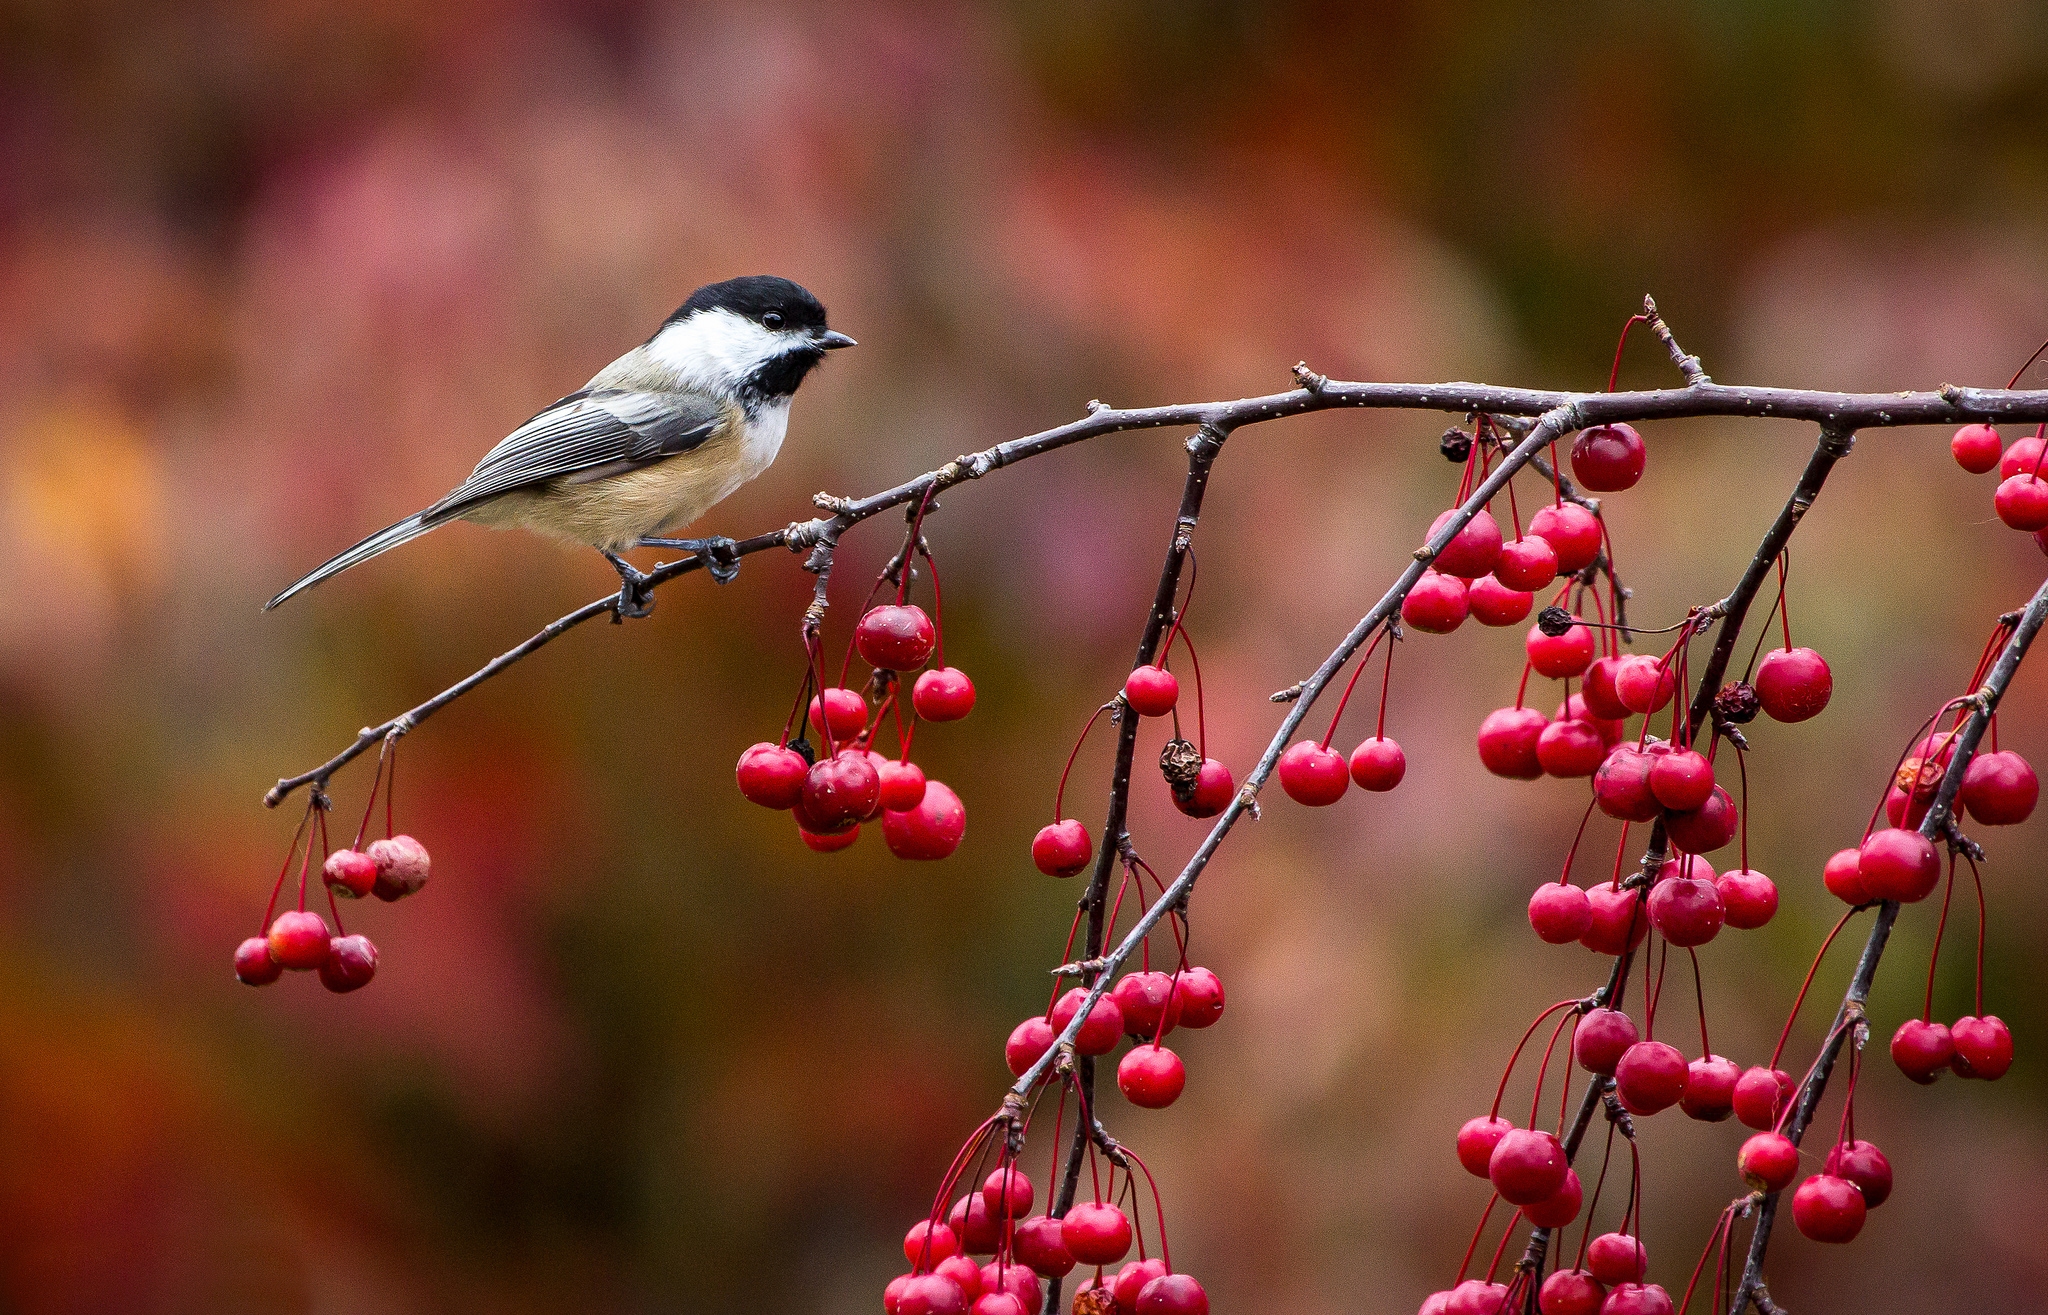 69649 download wallpaper bird, animals, autumn, berries, branch, tit, titica, little bird, birdie, titmouse, sinicka screensavers and pictures for free